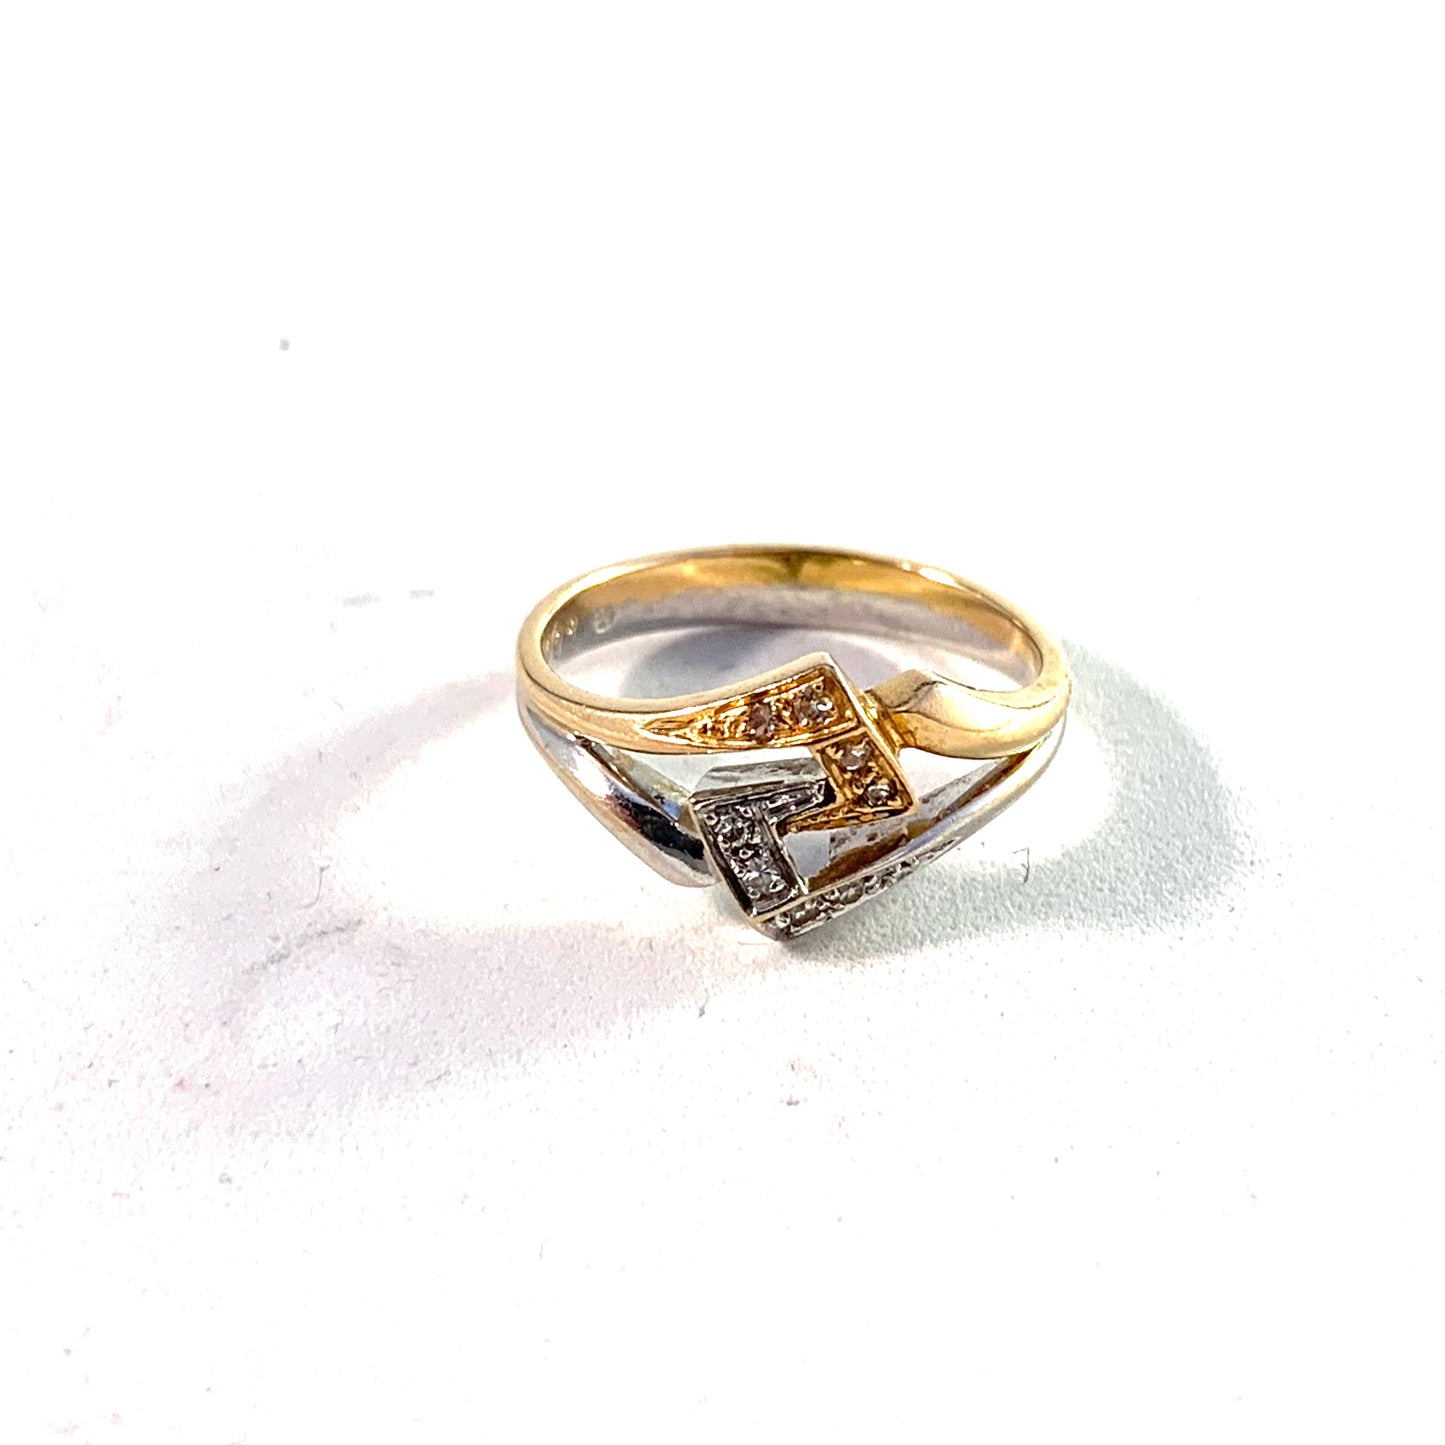 Sweden 1980s Vintage 18k White and Yellow Gold Diamond Ring.